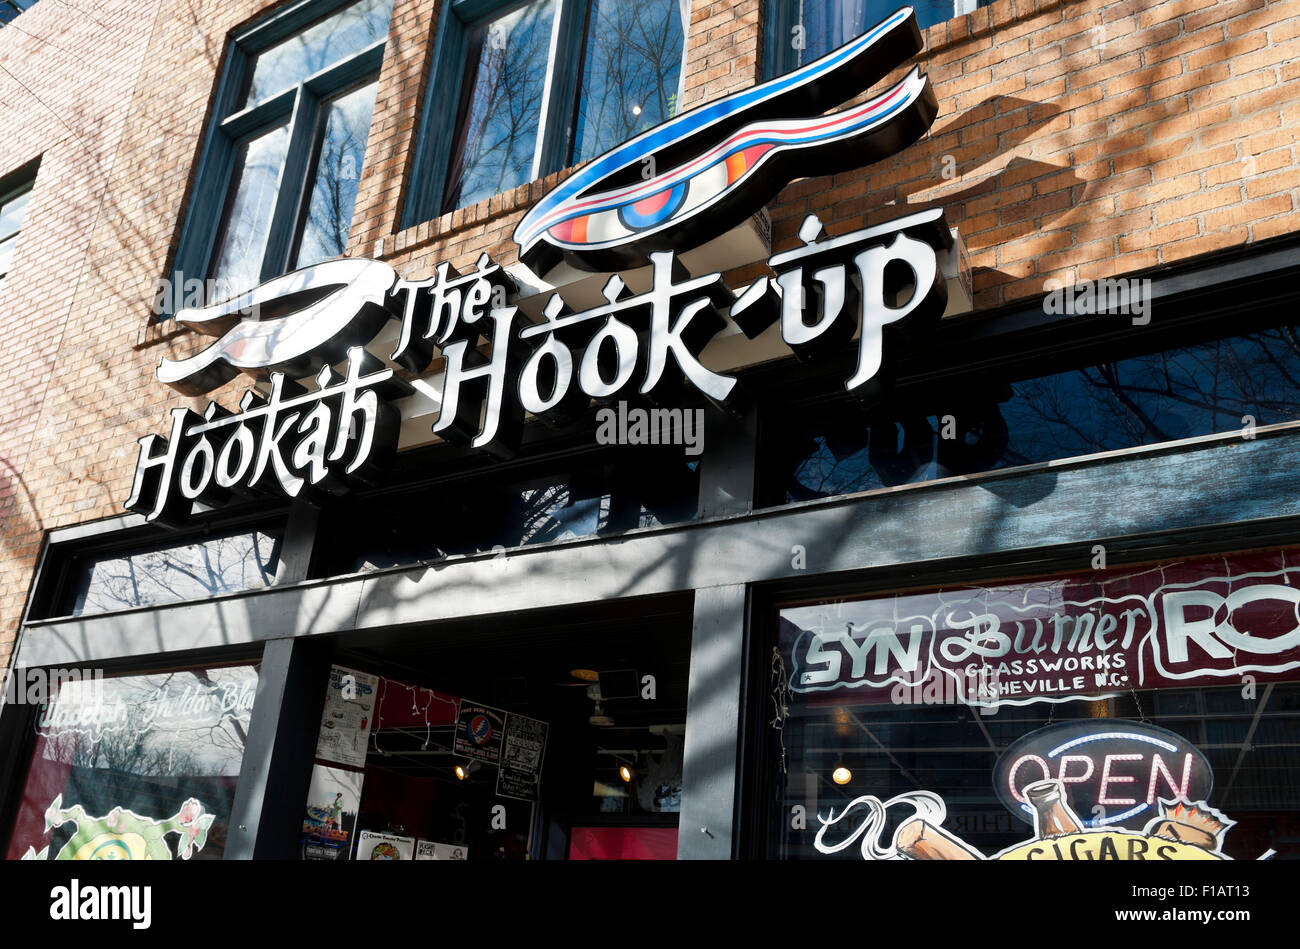 Hookah Hook-Up storefront and sign in Asheville Stock Photo